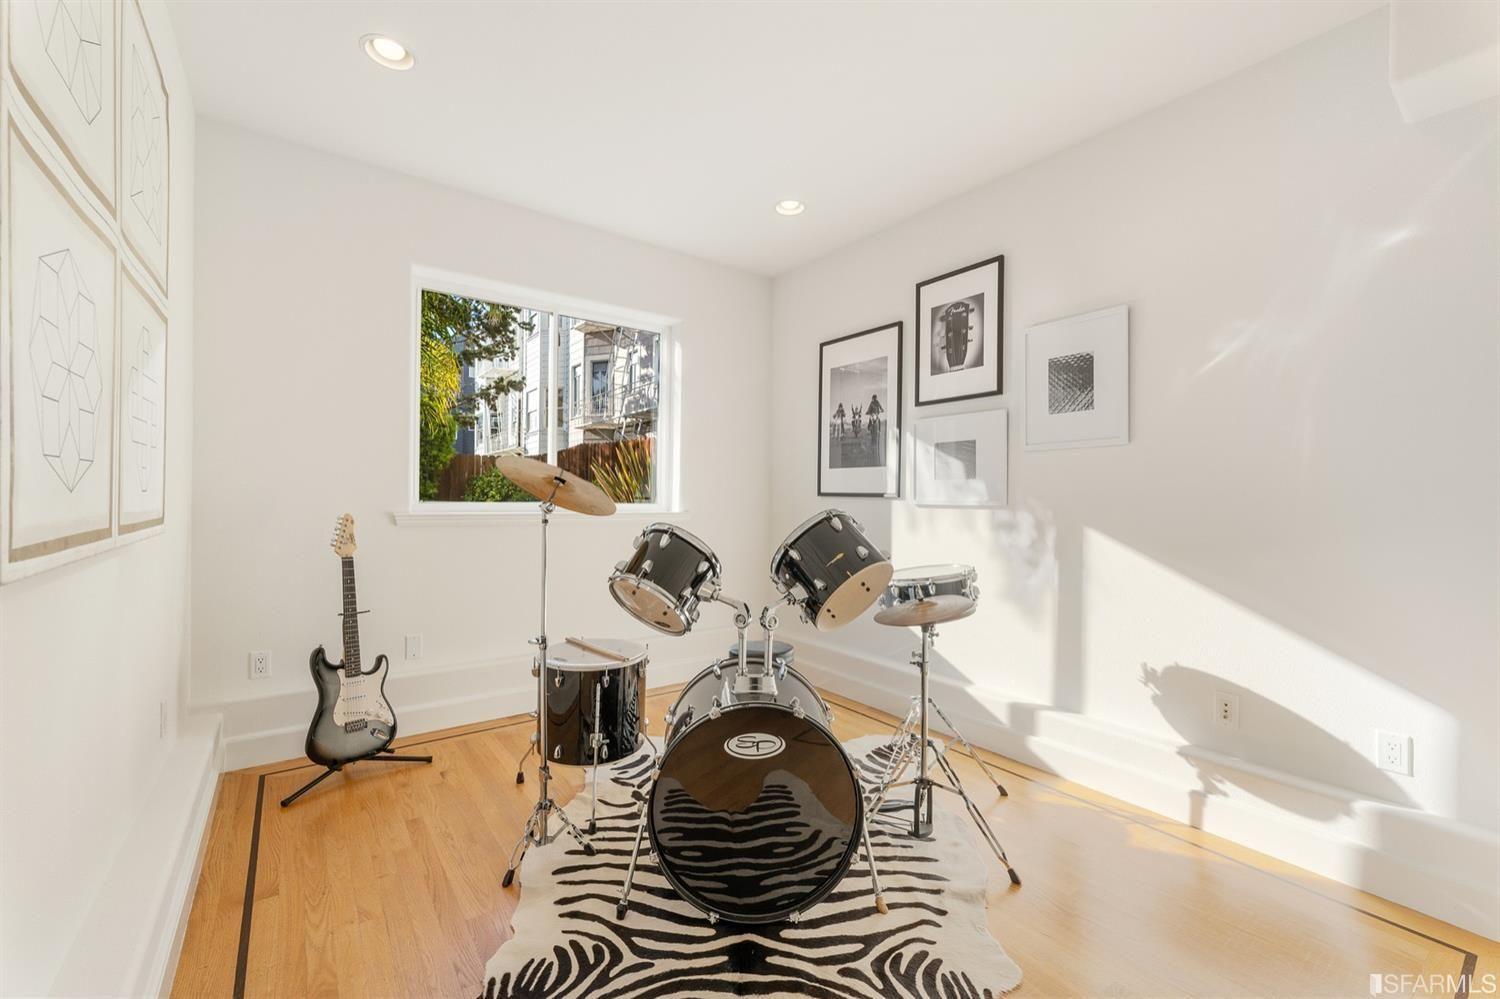 217-219 16th Avenue Music room with drum set and guitar. 